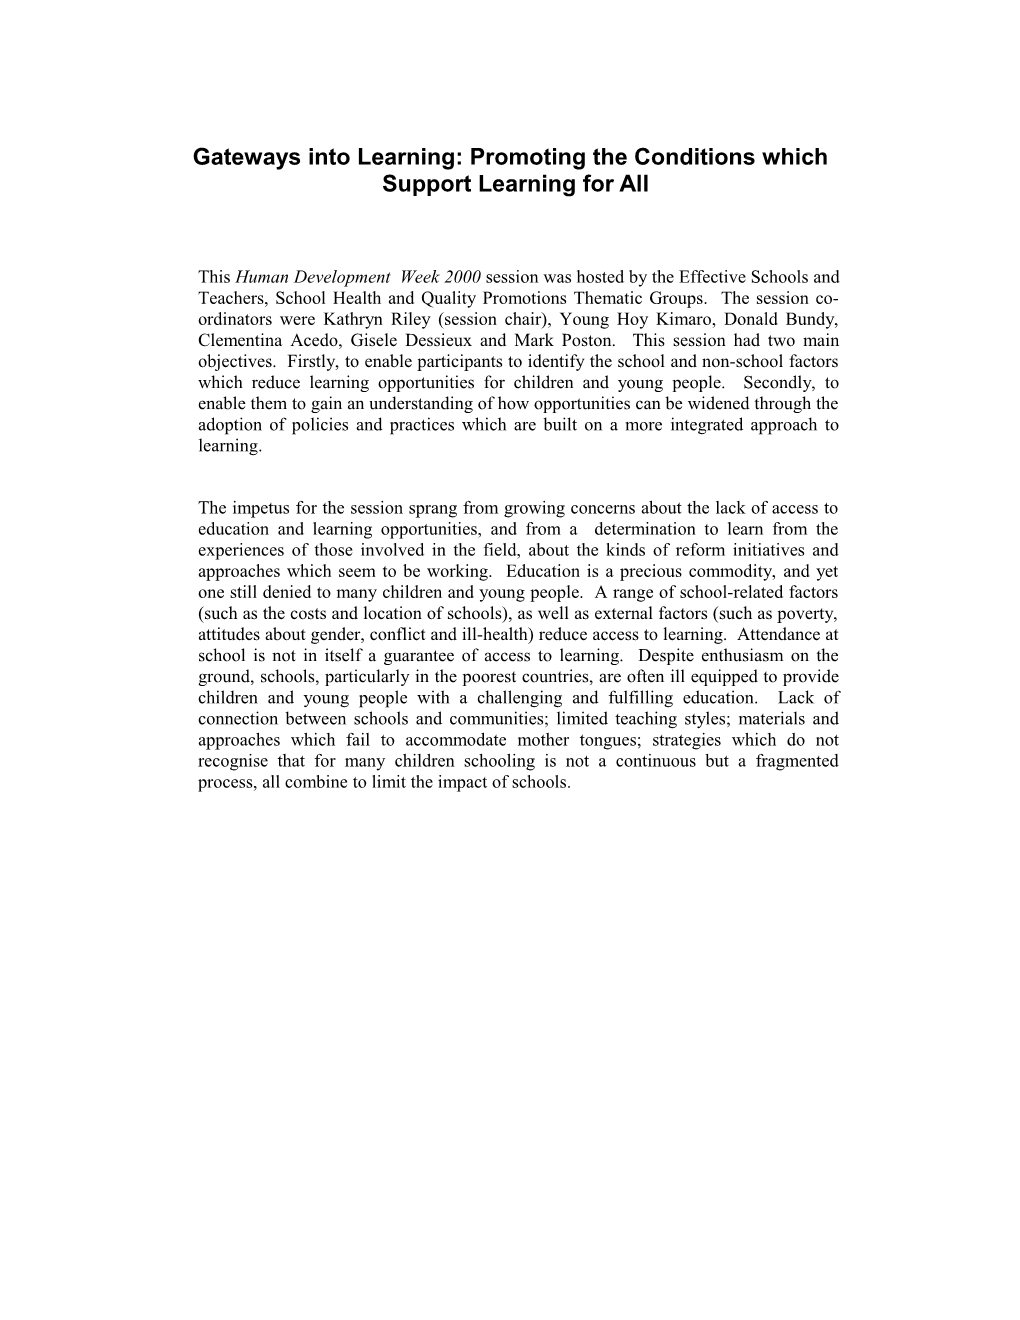 Gateway to Learning: Promoting the Conditions Which Support Learning for All